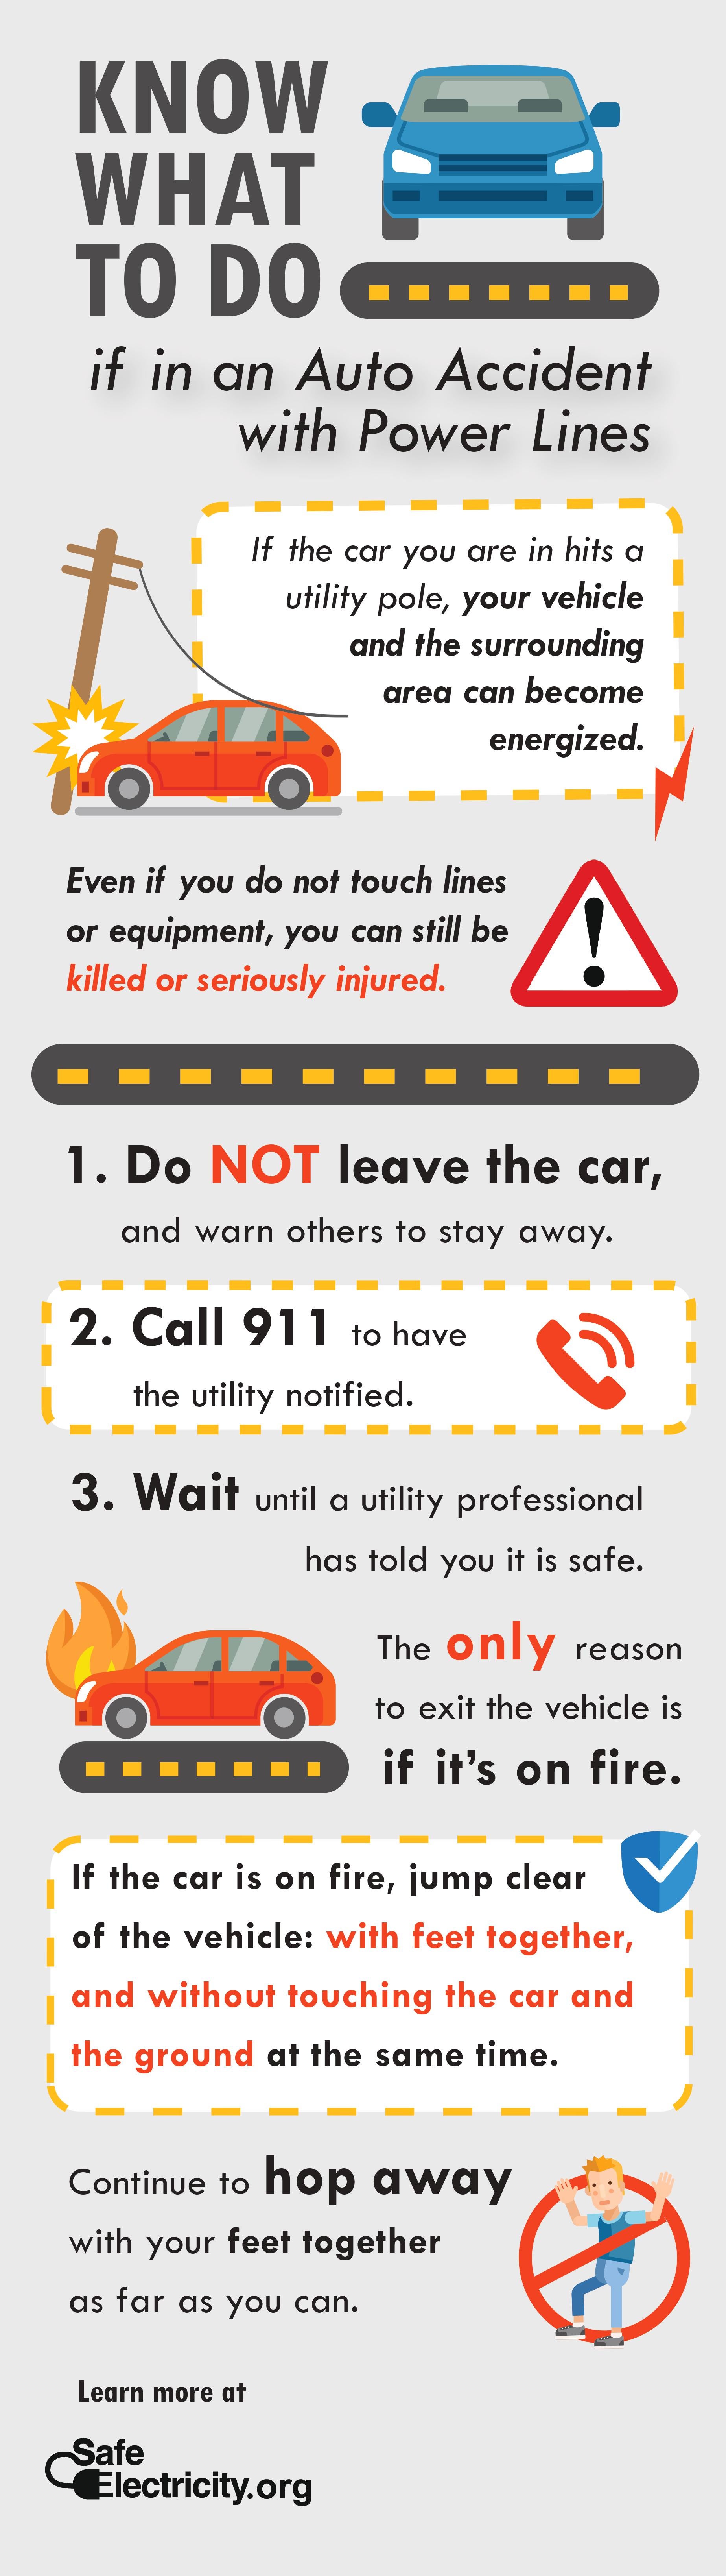 Auto Safety Infographic